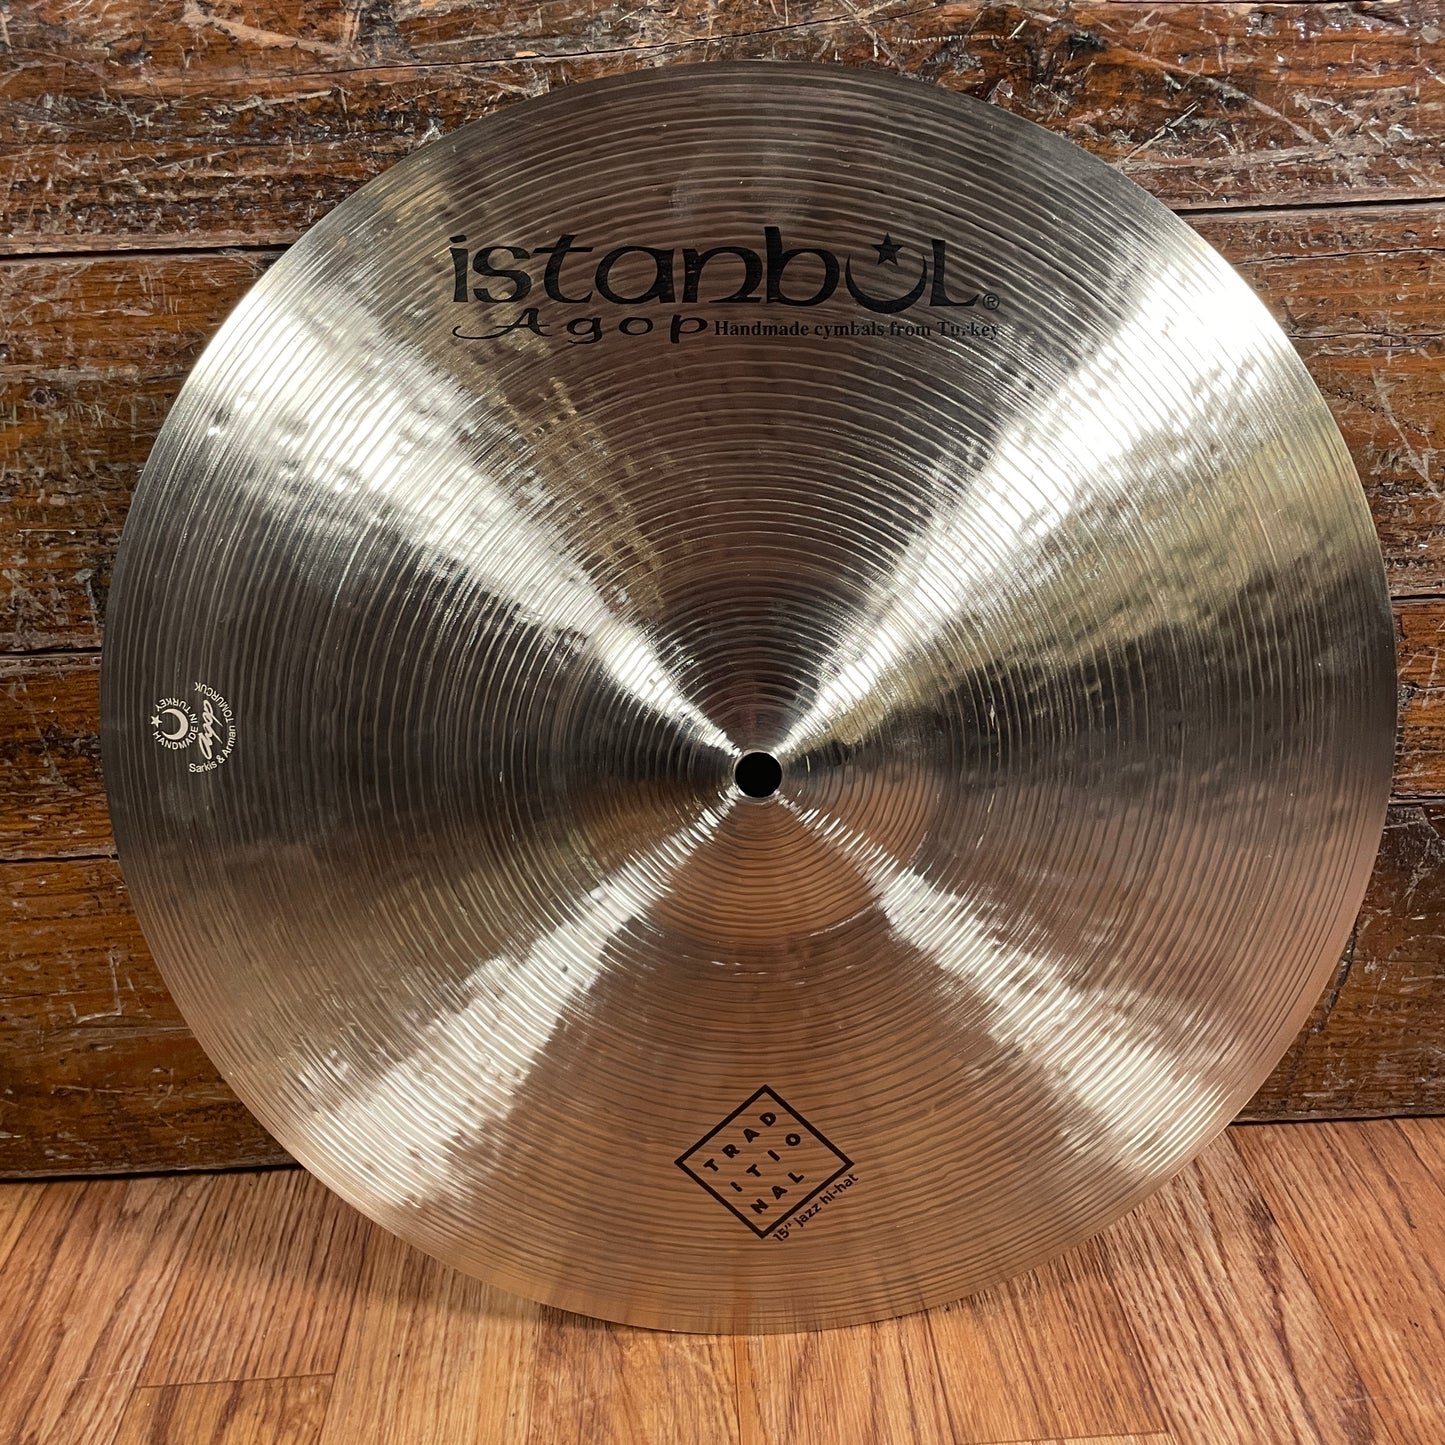 15" Istanbul Agop Traditional Jazz Hi-Hat Cymbal Pair 1008g/1182g *Video Demo*